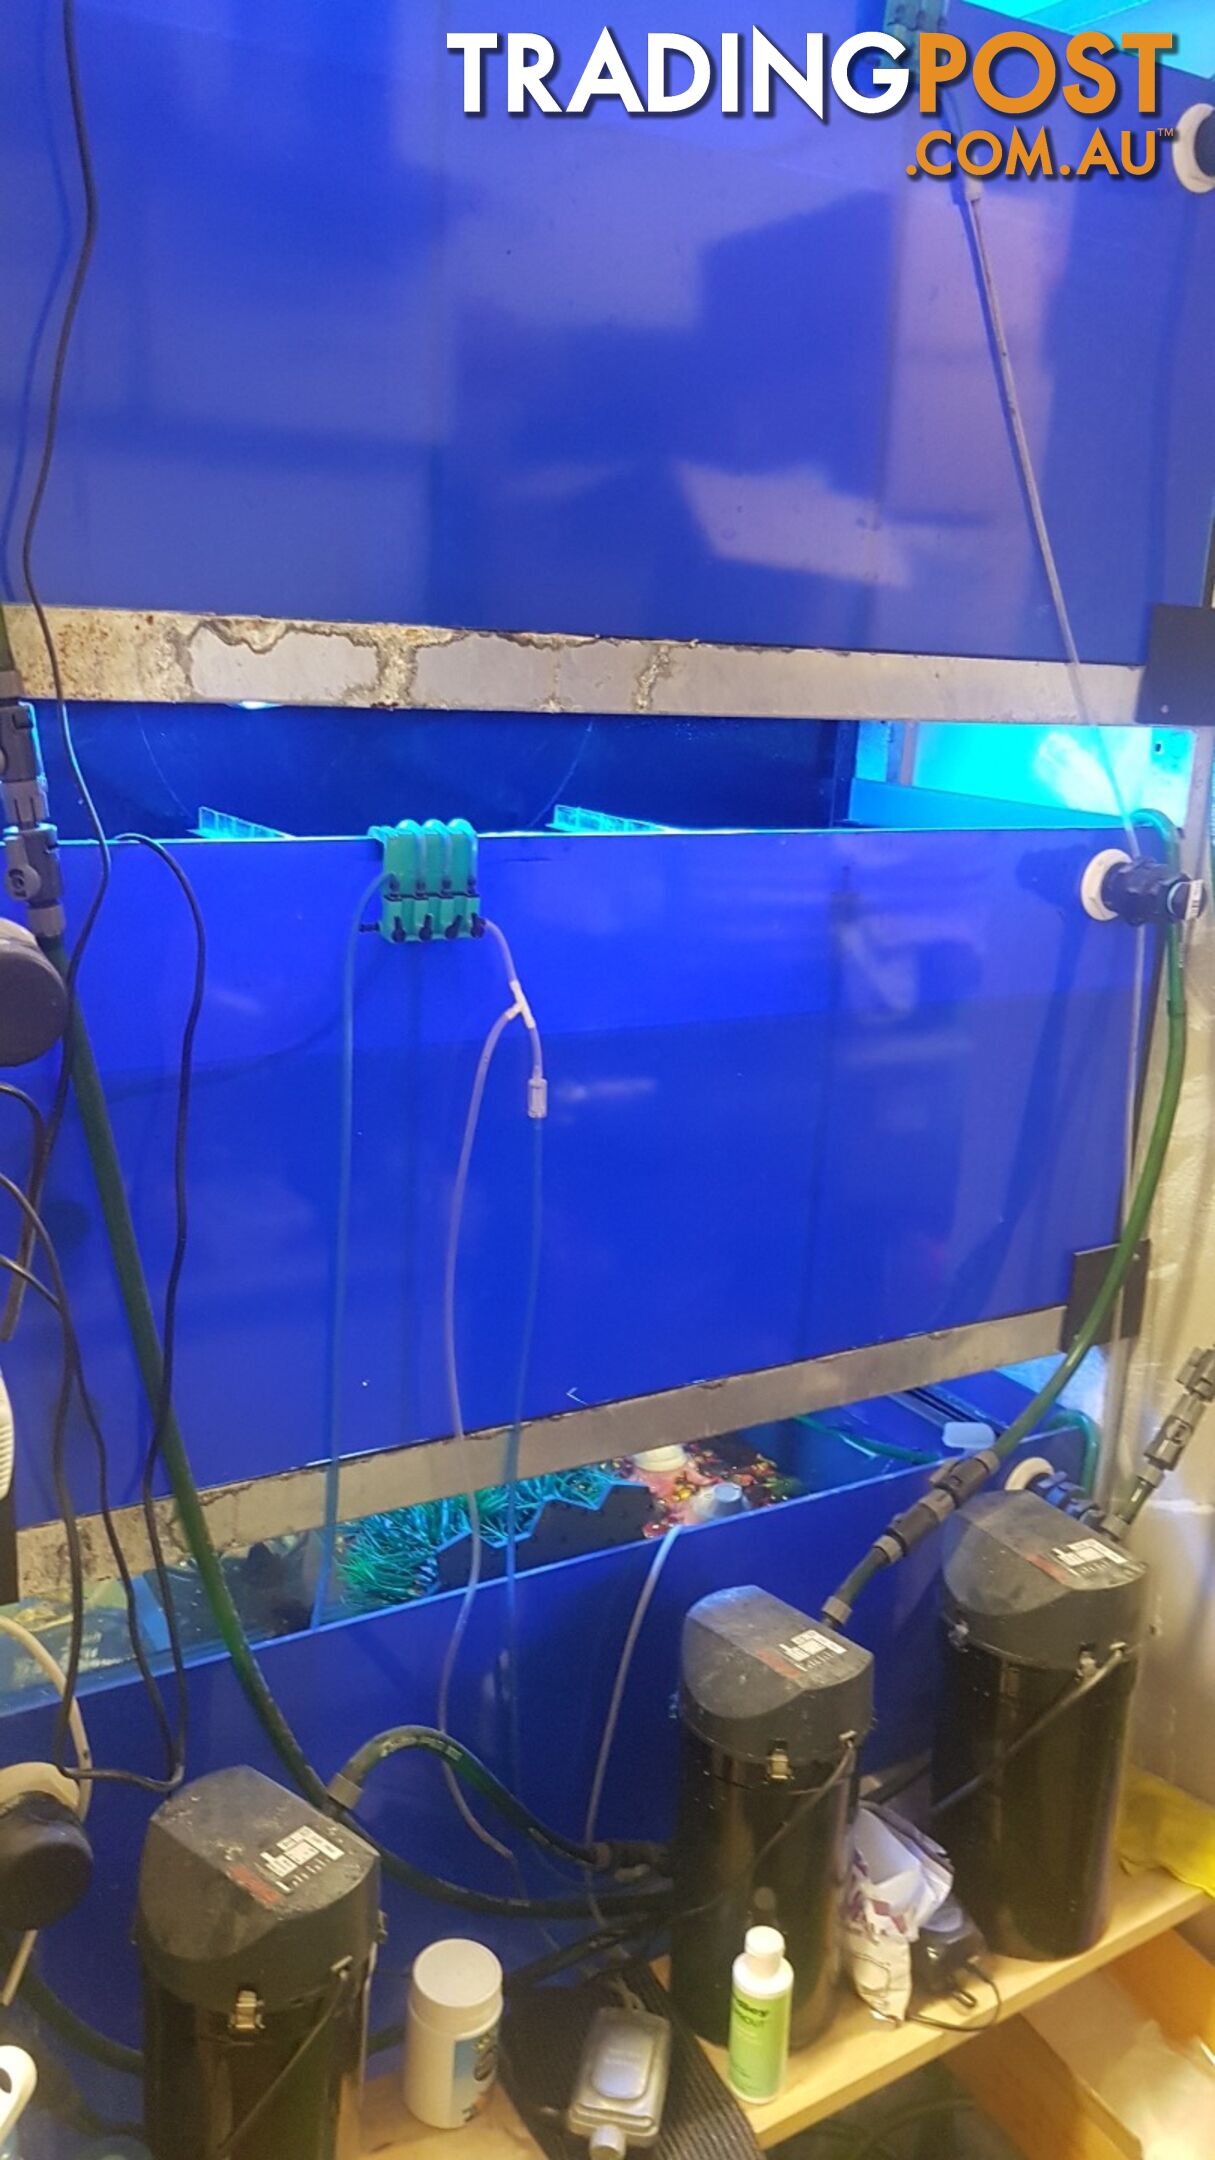 DISPLAY AQUARIUM - 3x 4FT TANKS ON GALVANISED STEEL FRAME, WITH LIGHTS, FILTERS, AND MORE